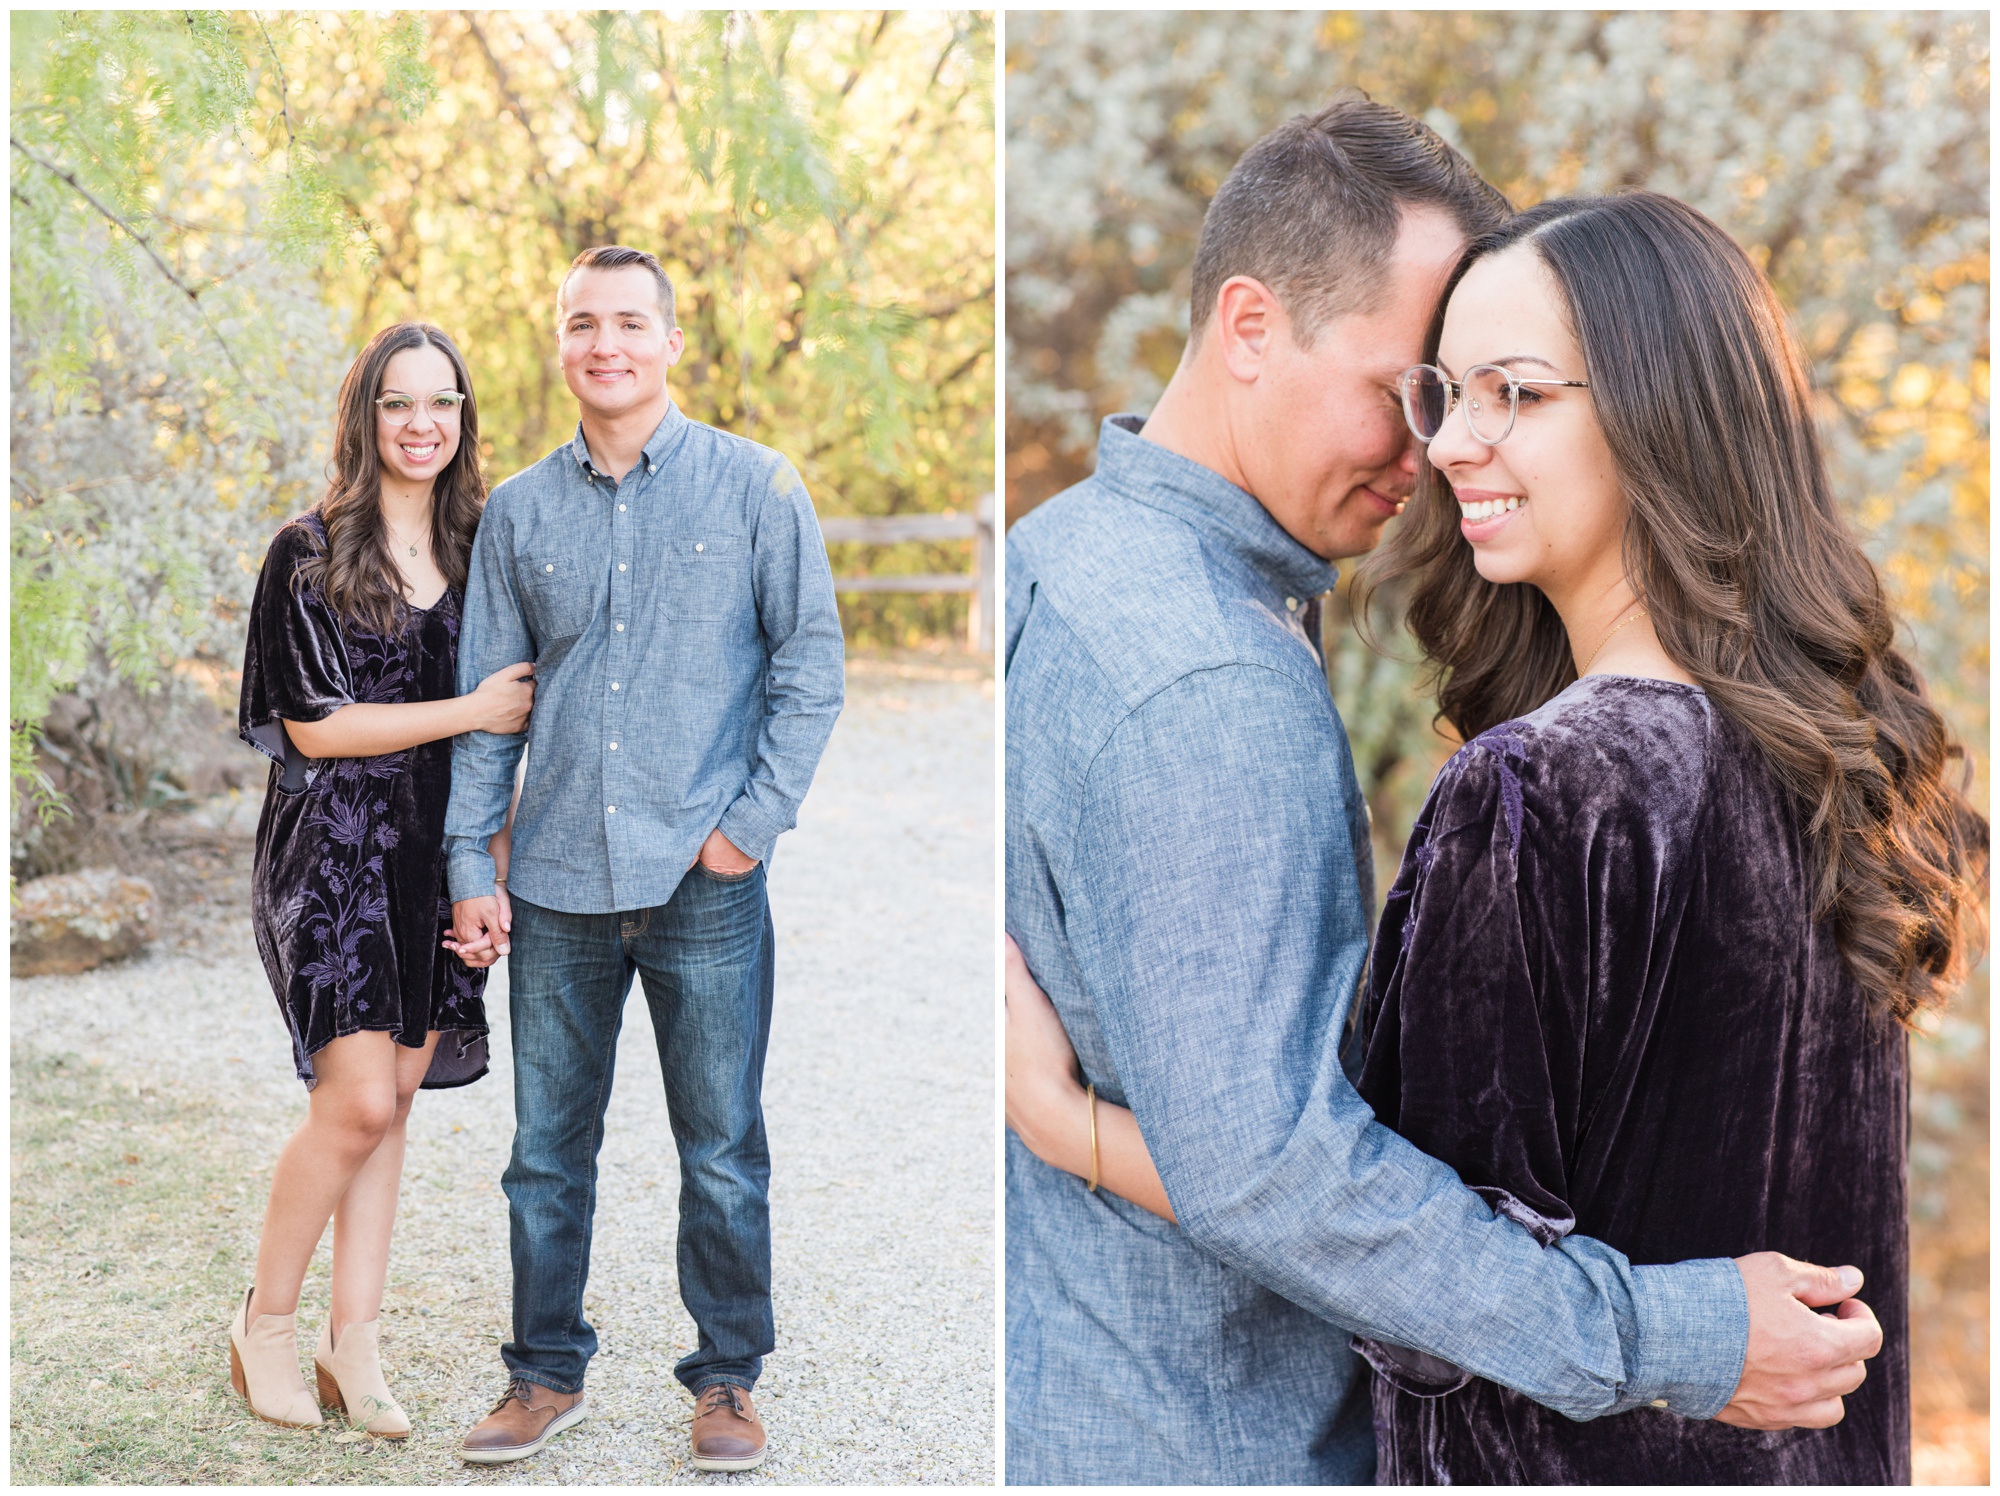 Fort Worth Stockyards | Fort Worth Stockyards Cactus Garden | Fort Worth Couples Session | Fort Worth Anniversary Session | Fort Worth Cactus Garden | Lauren Grimes Photography | Fort Worth Couples Photographer